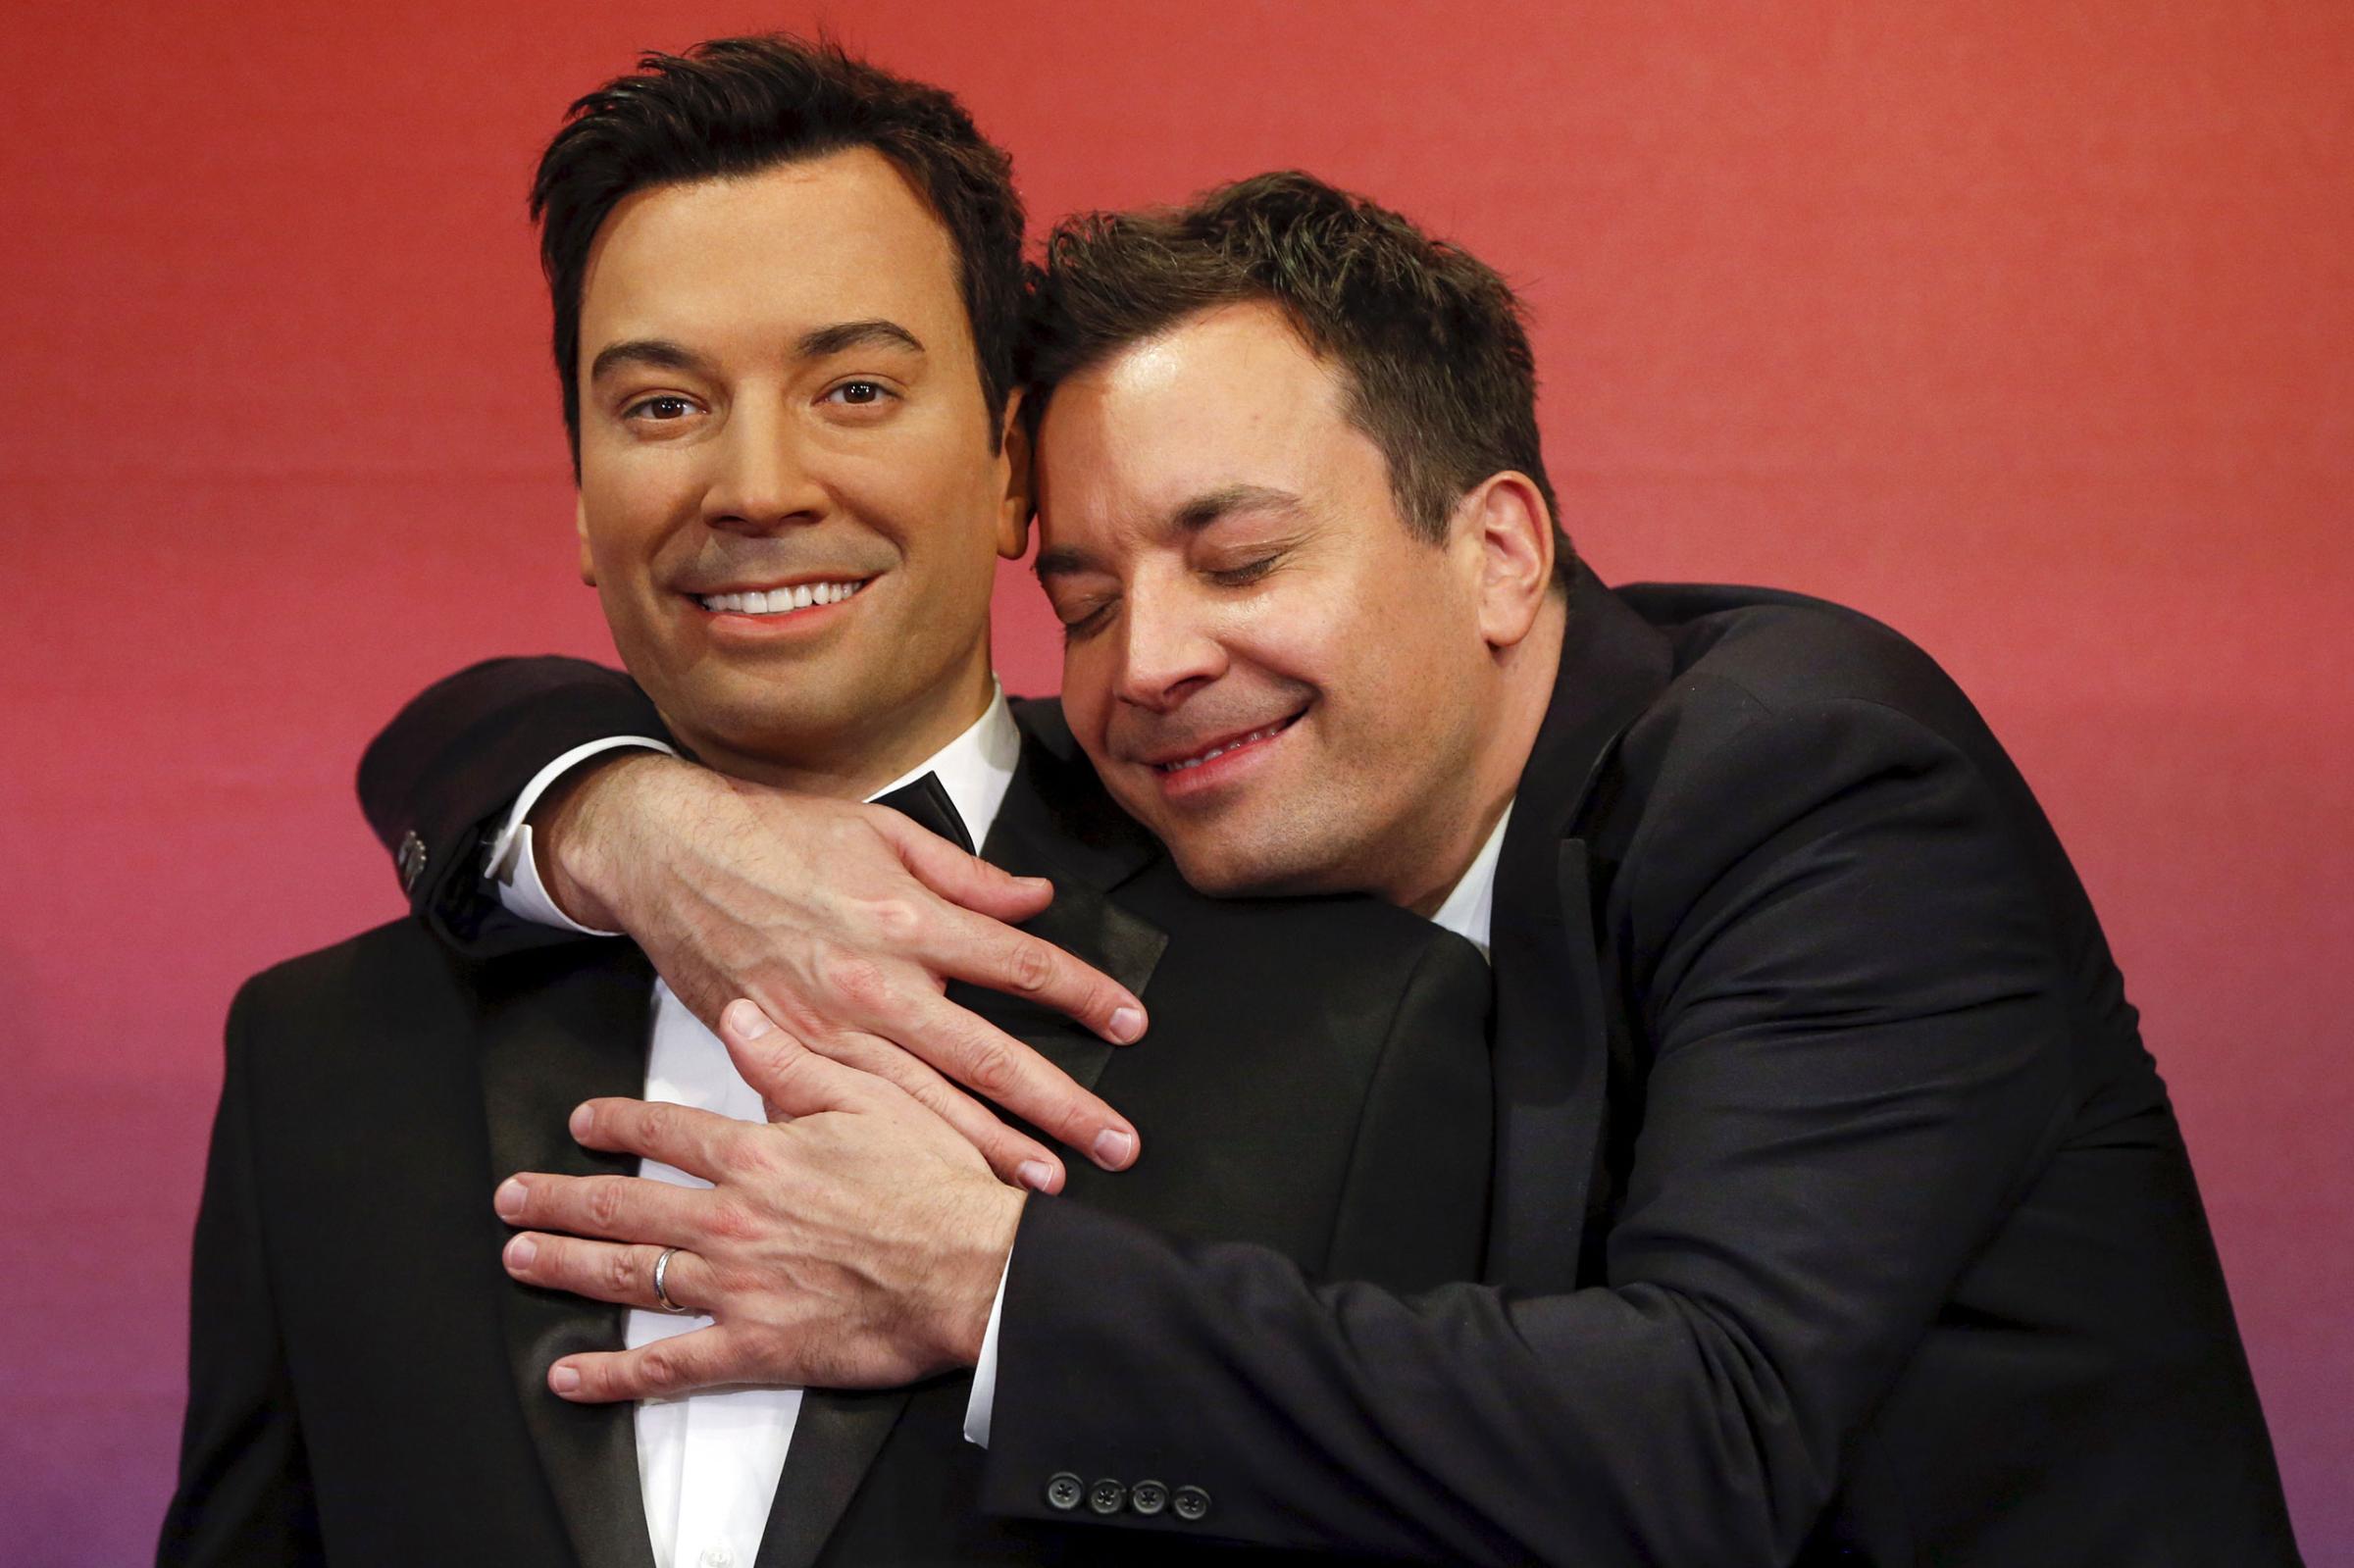 TV host Fallon poses with his wax figures at Madame Tussauds museum in the Manhattan borough of New York